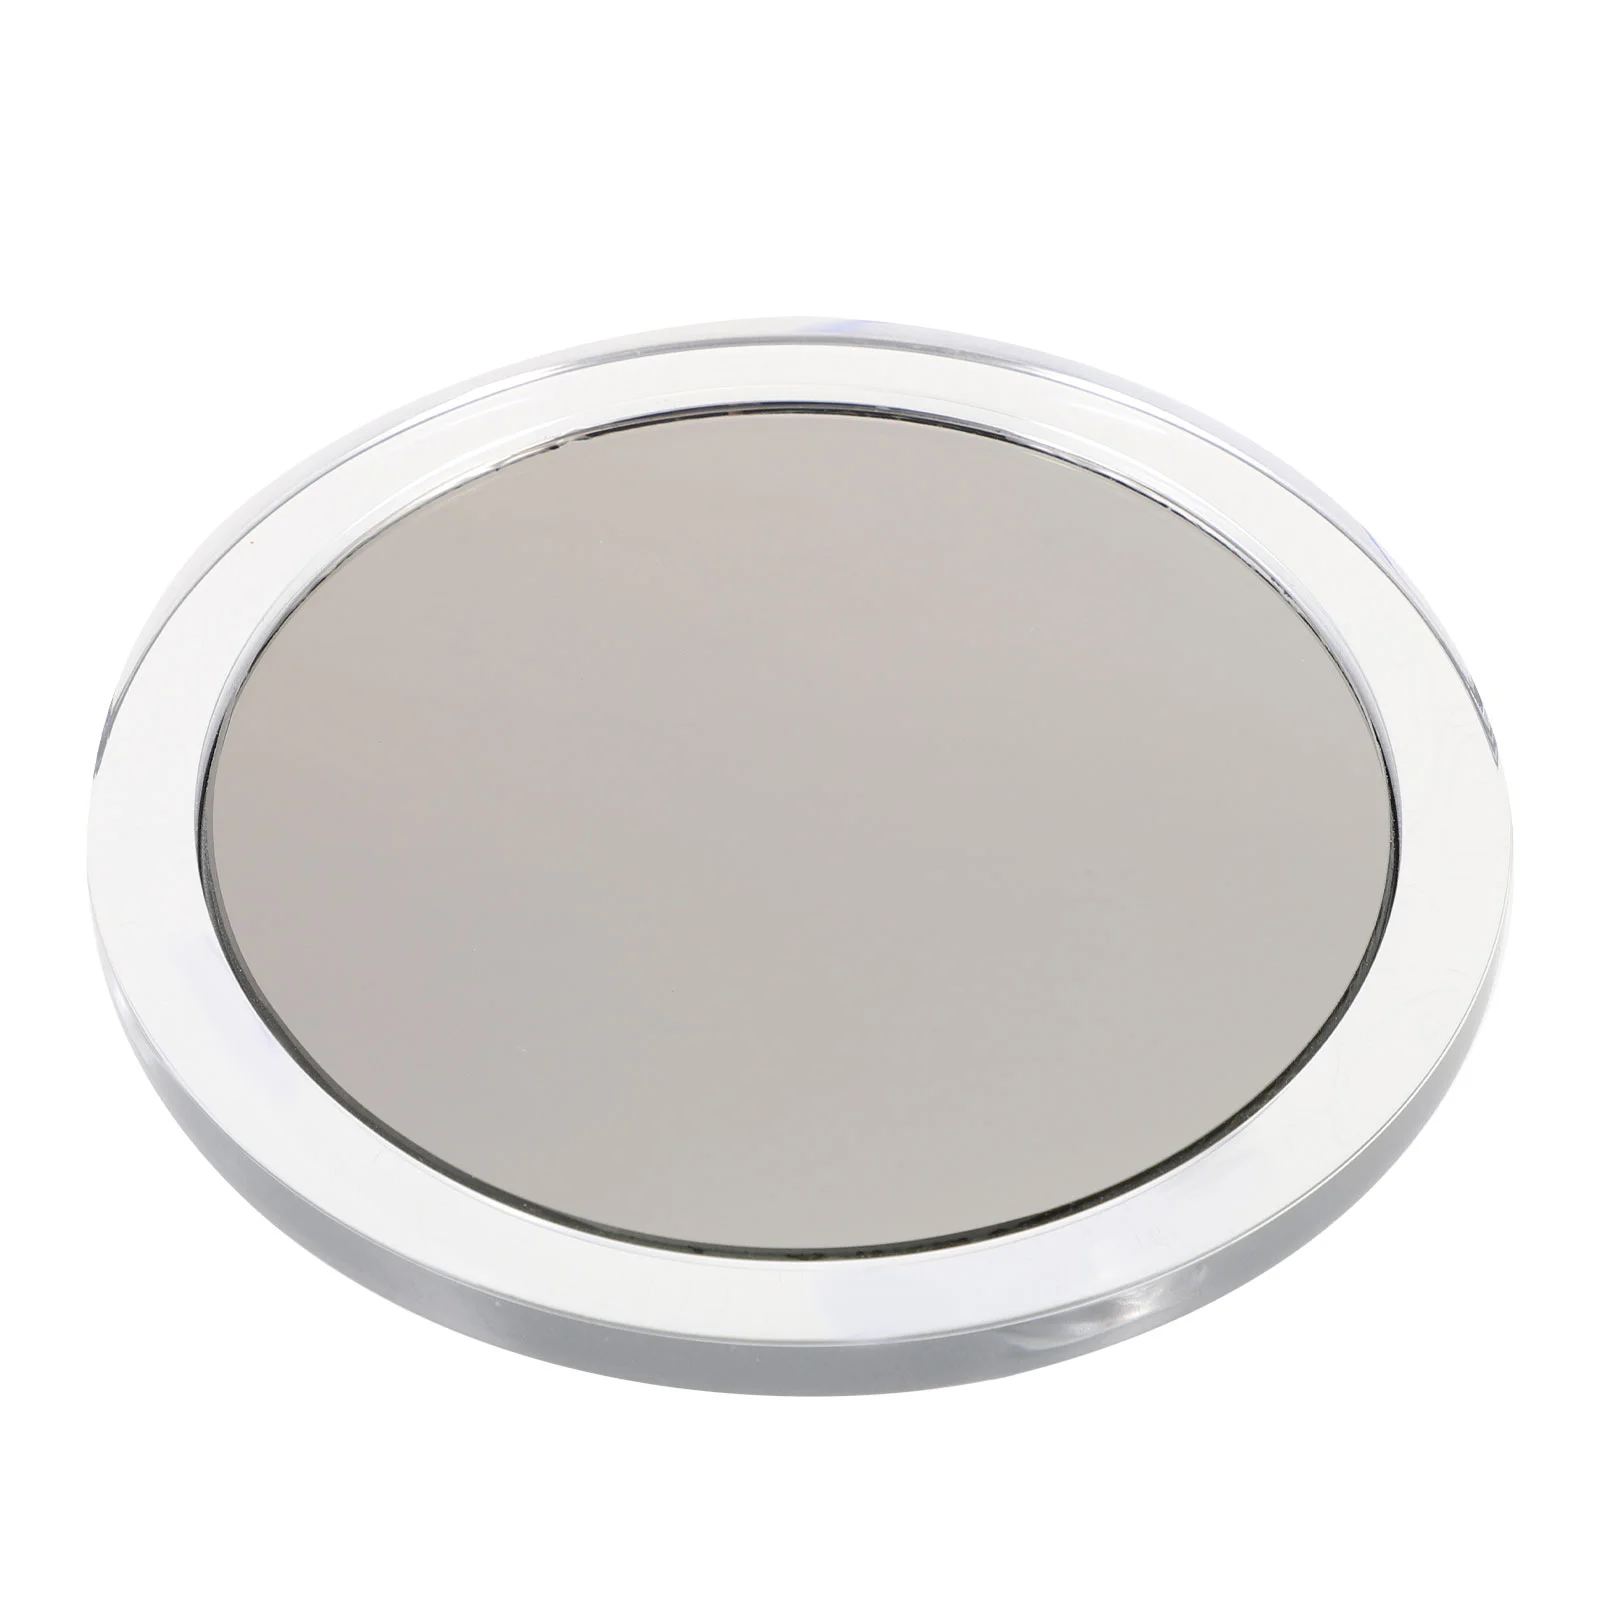 

Mirror Magnifying Makeup Suction Cup Mirrors Bathroom Travel Portable Round Compact Cups Vanity Shower 20X Spot Wall Pocket